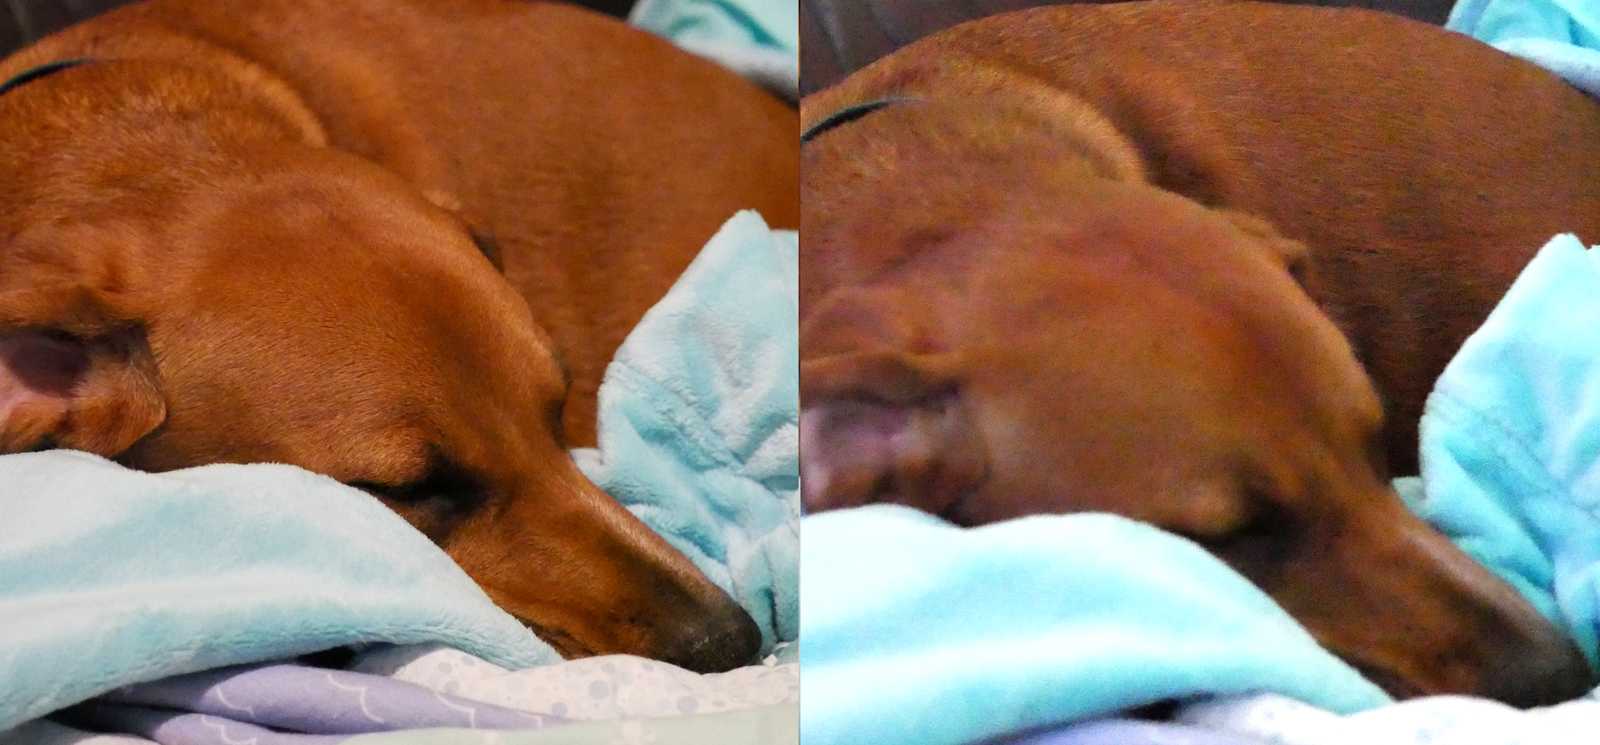 A side-by-side comparison of similar photos taken at two different ISO settings.